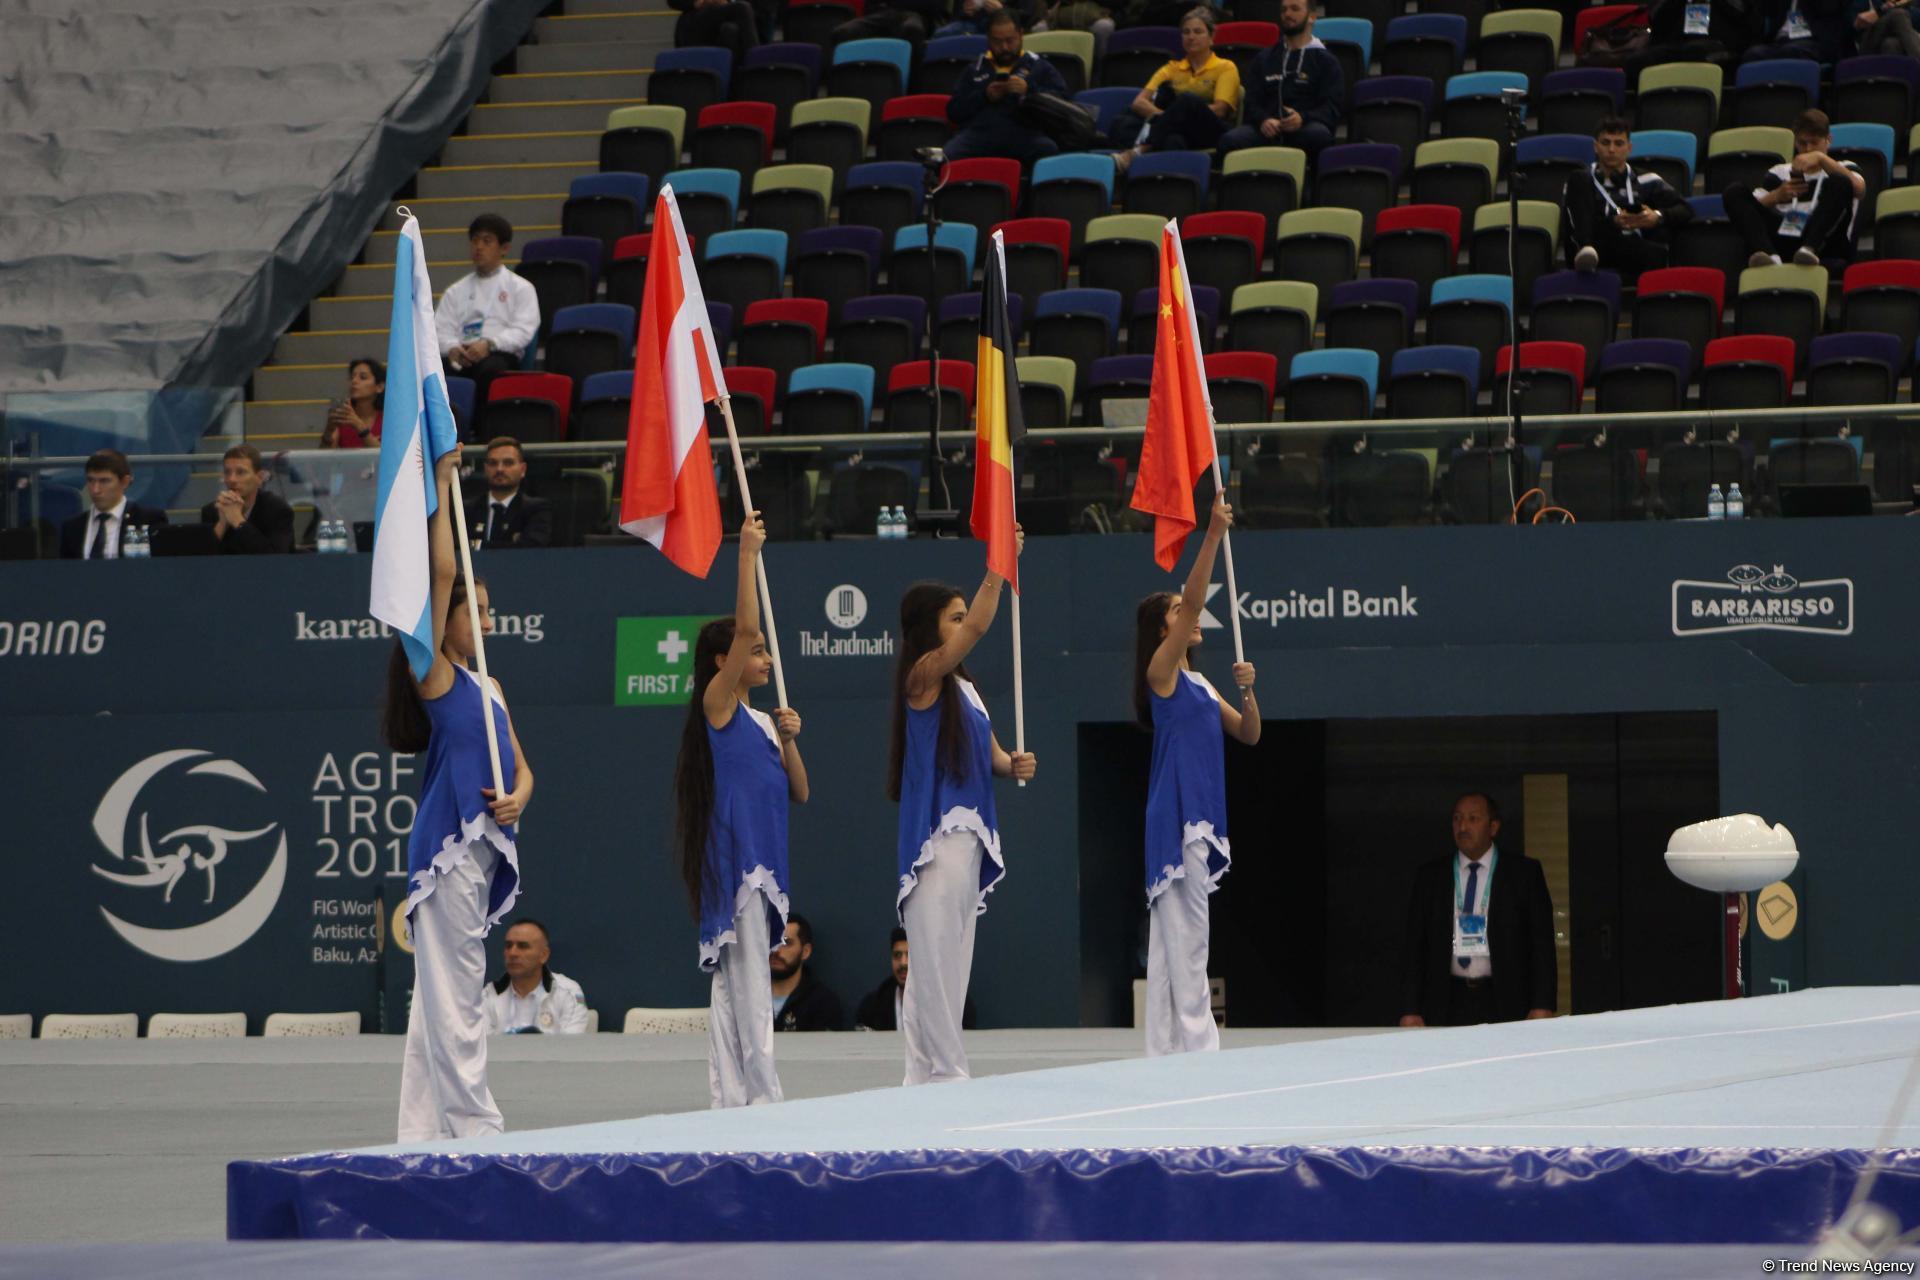 Opening ceremony of FIG Artistic Gymnastics Individual Apparatus World Cup held in Baku (PHOTO)